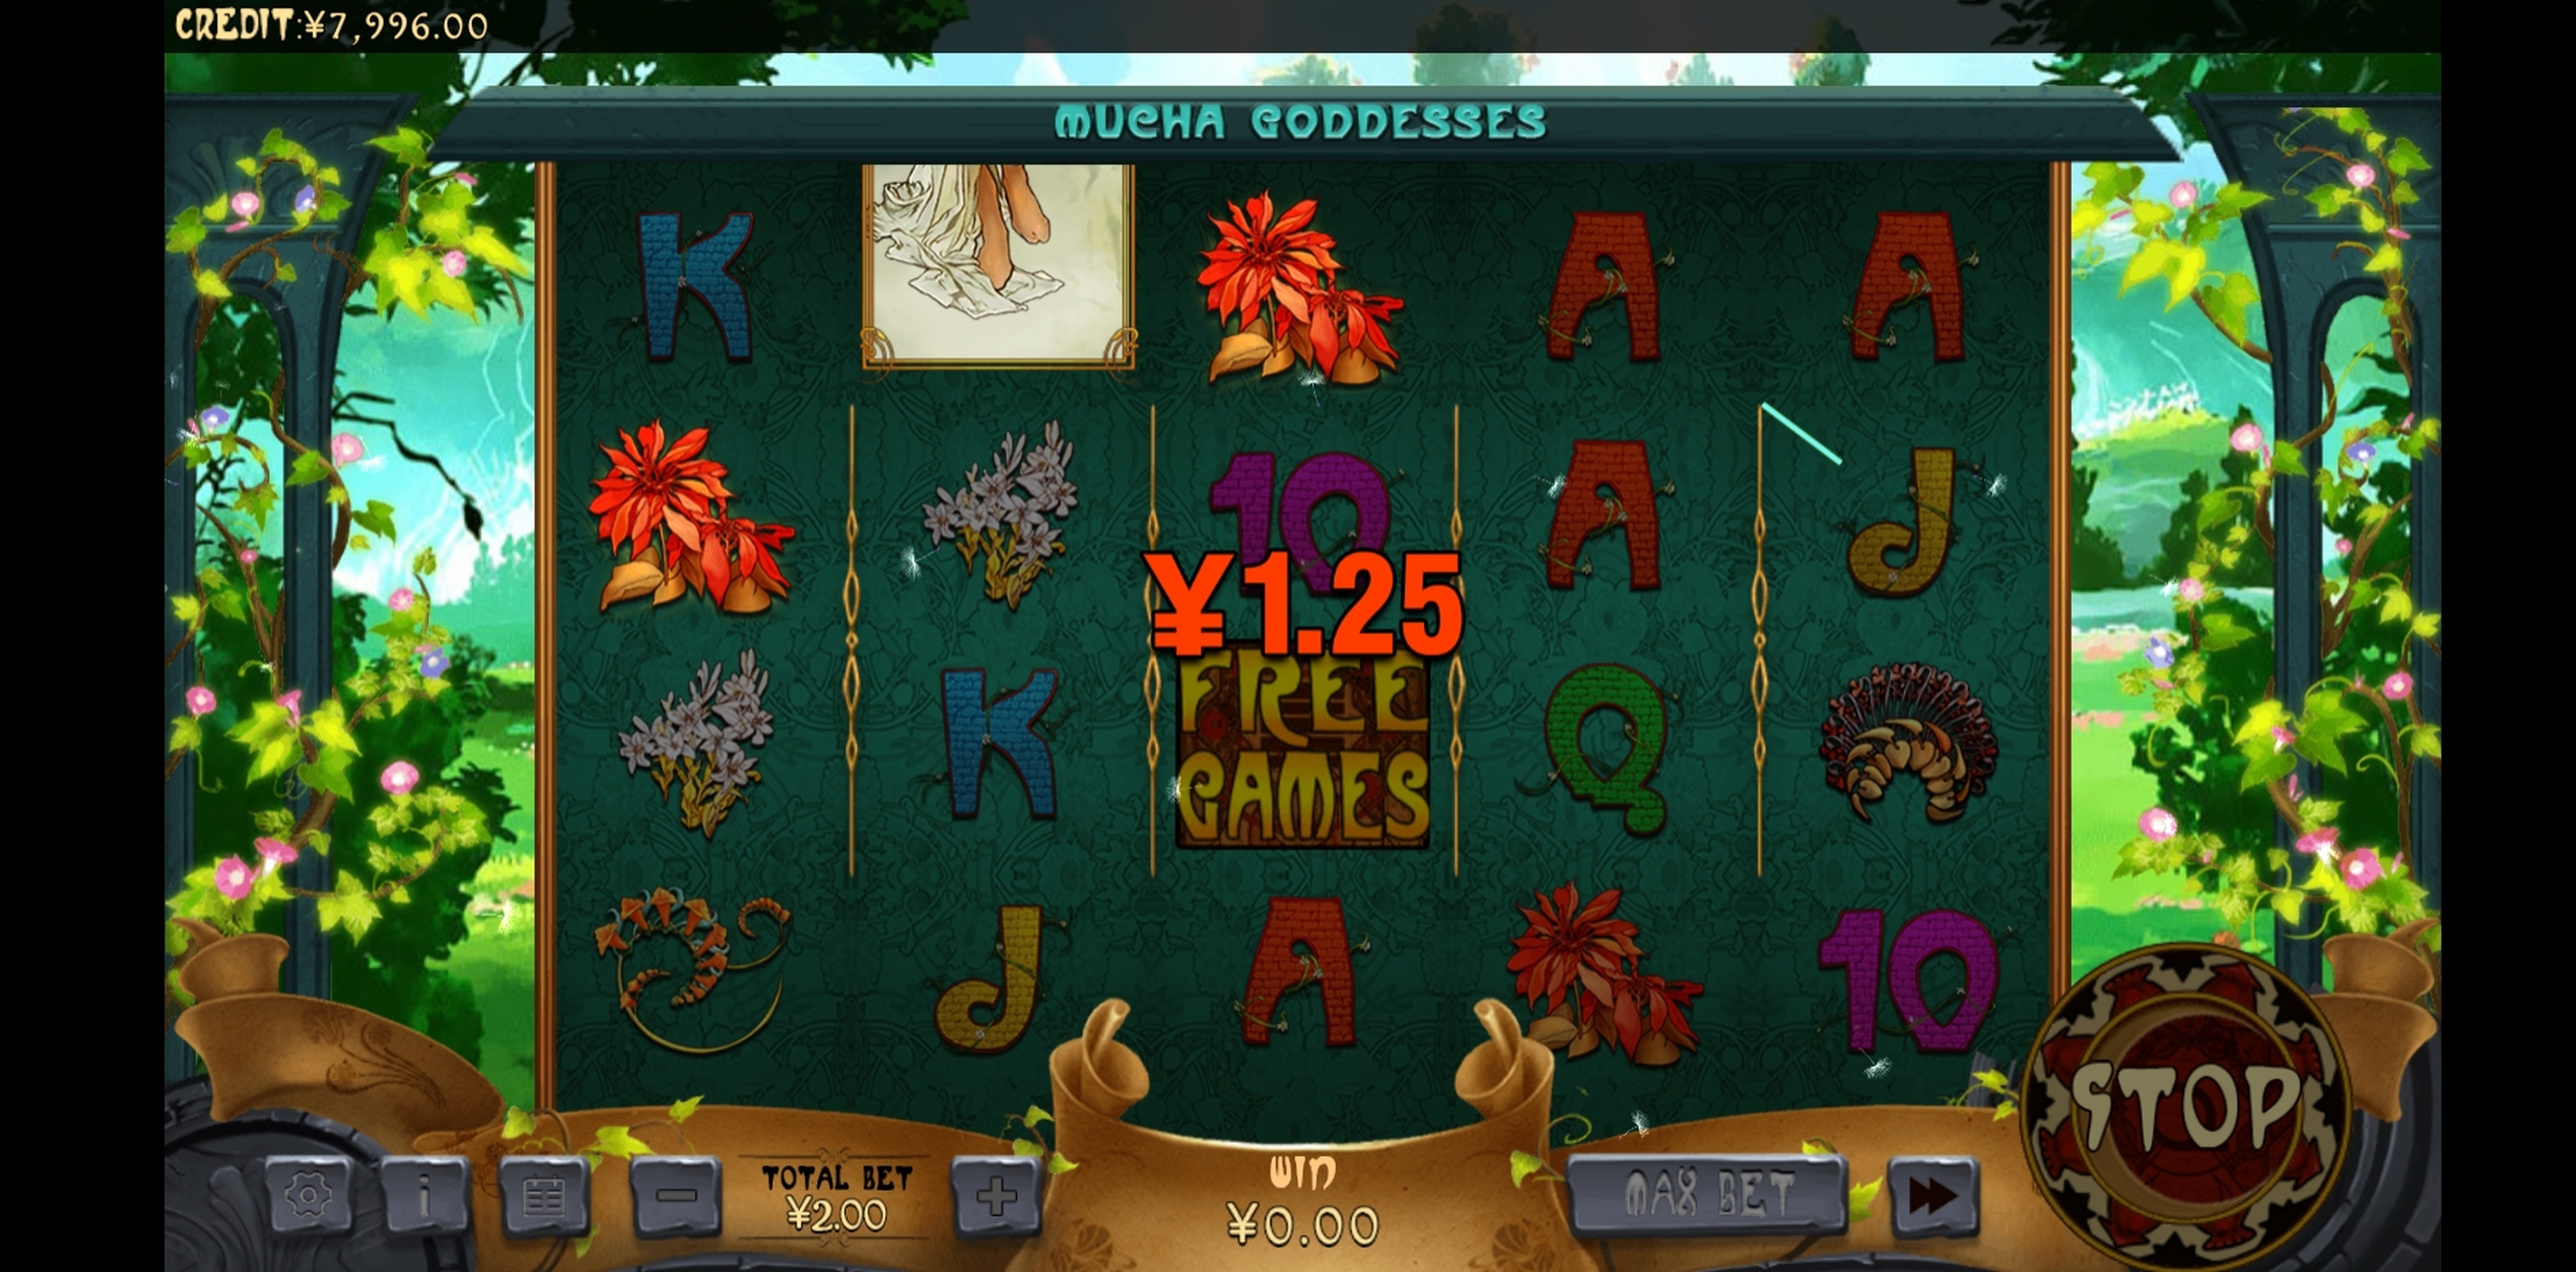 Win Money in Mucha Goddesses Free Slot Game by XIN Gaming